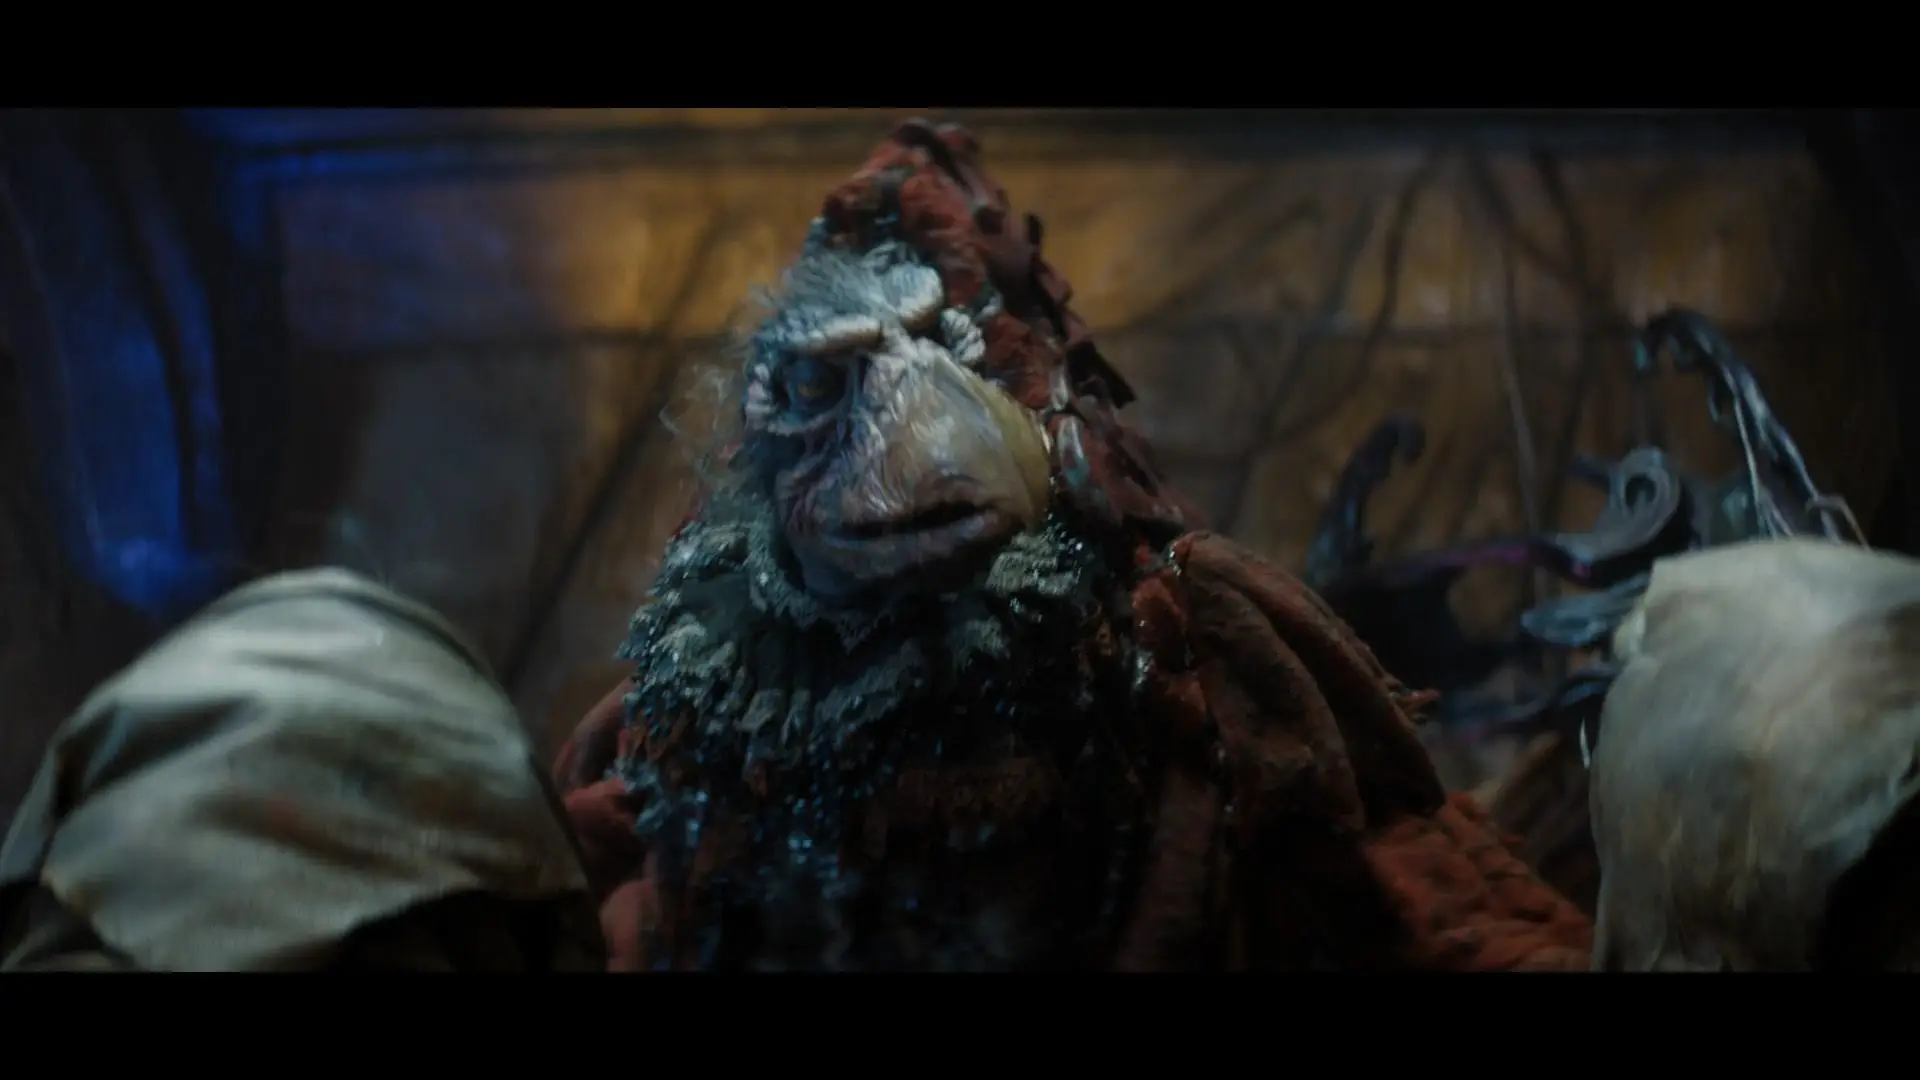 The Dark Crystal: Age of Resistance S01